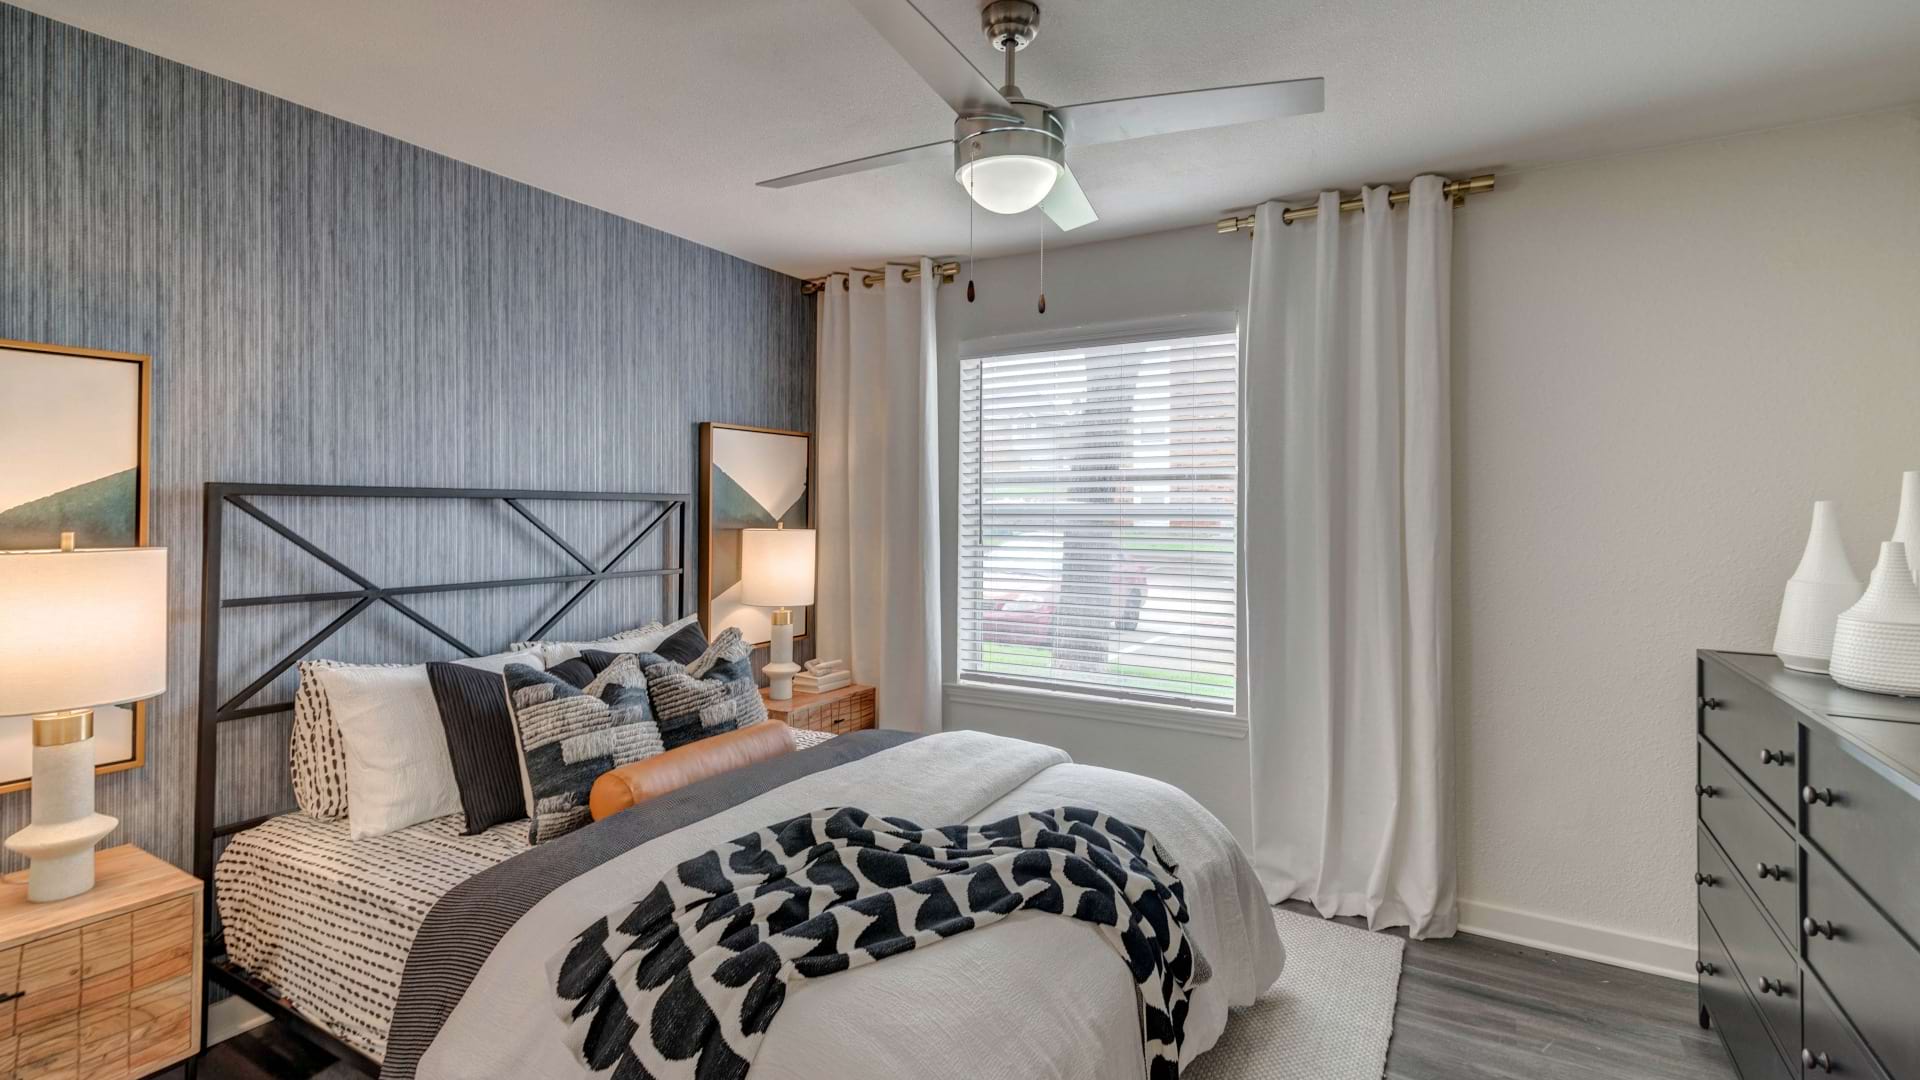 Charming Bedroom with a Large Window in Our Bedford, TX Apartments